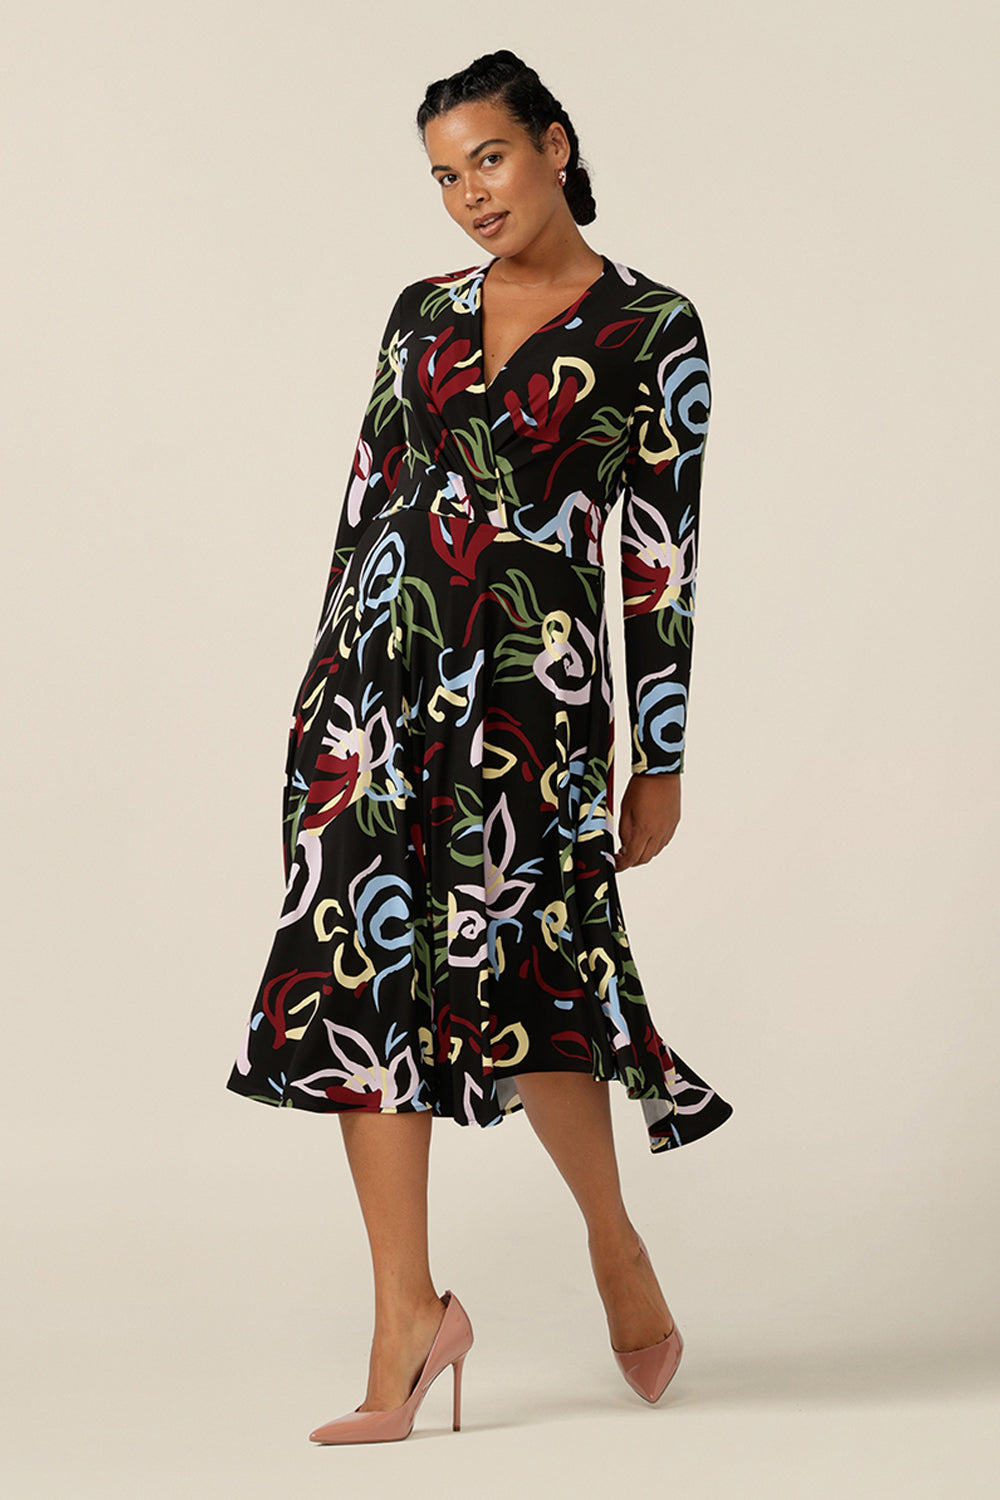 Back view of a size 12 woman wearing a knee-length, jersey, work dress with long sleeves. In printed jersey, abstract patterns add colour to the black base of this Australian-made dress.